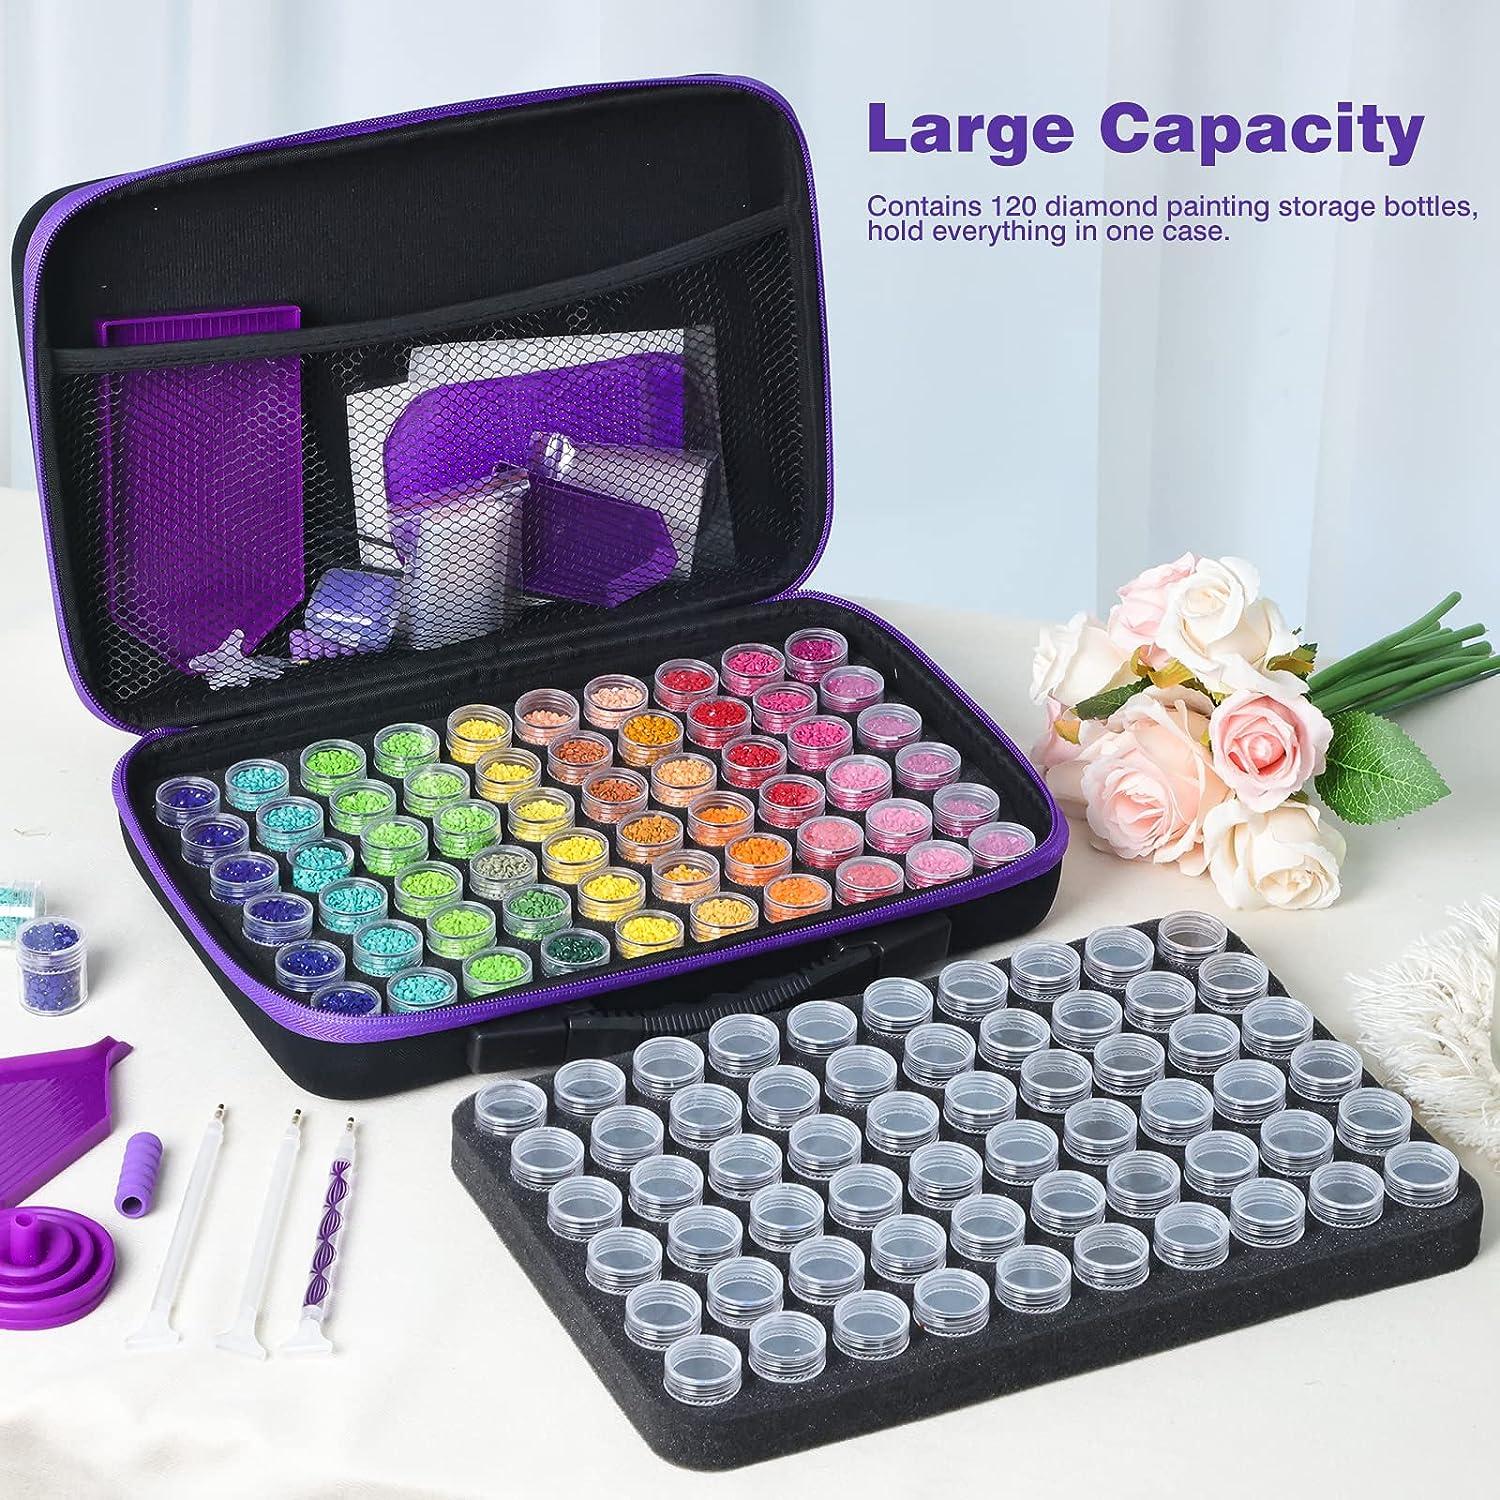 Diamond Painting Storage Containers Tools Accessories Kits with